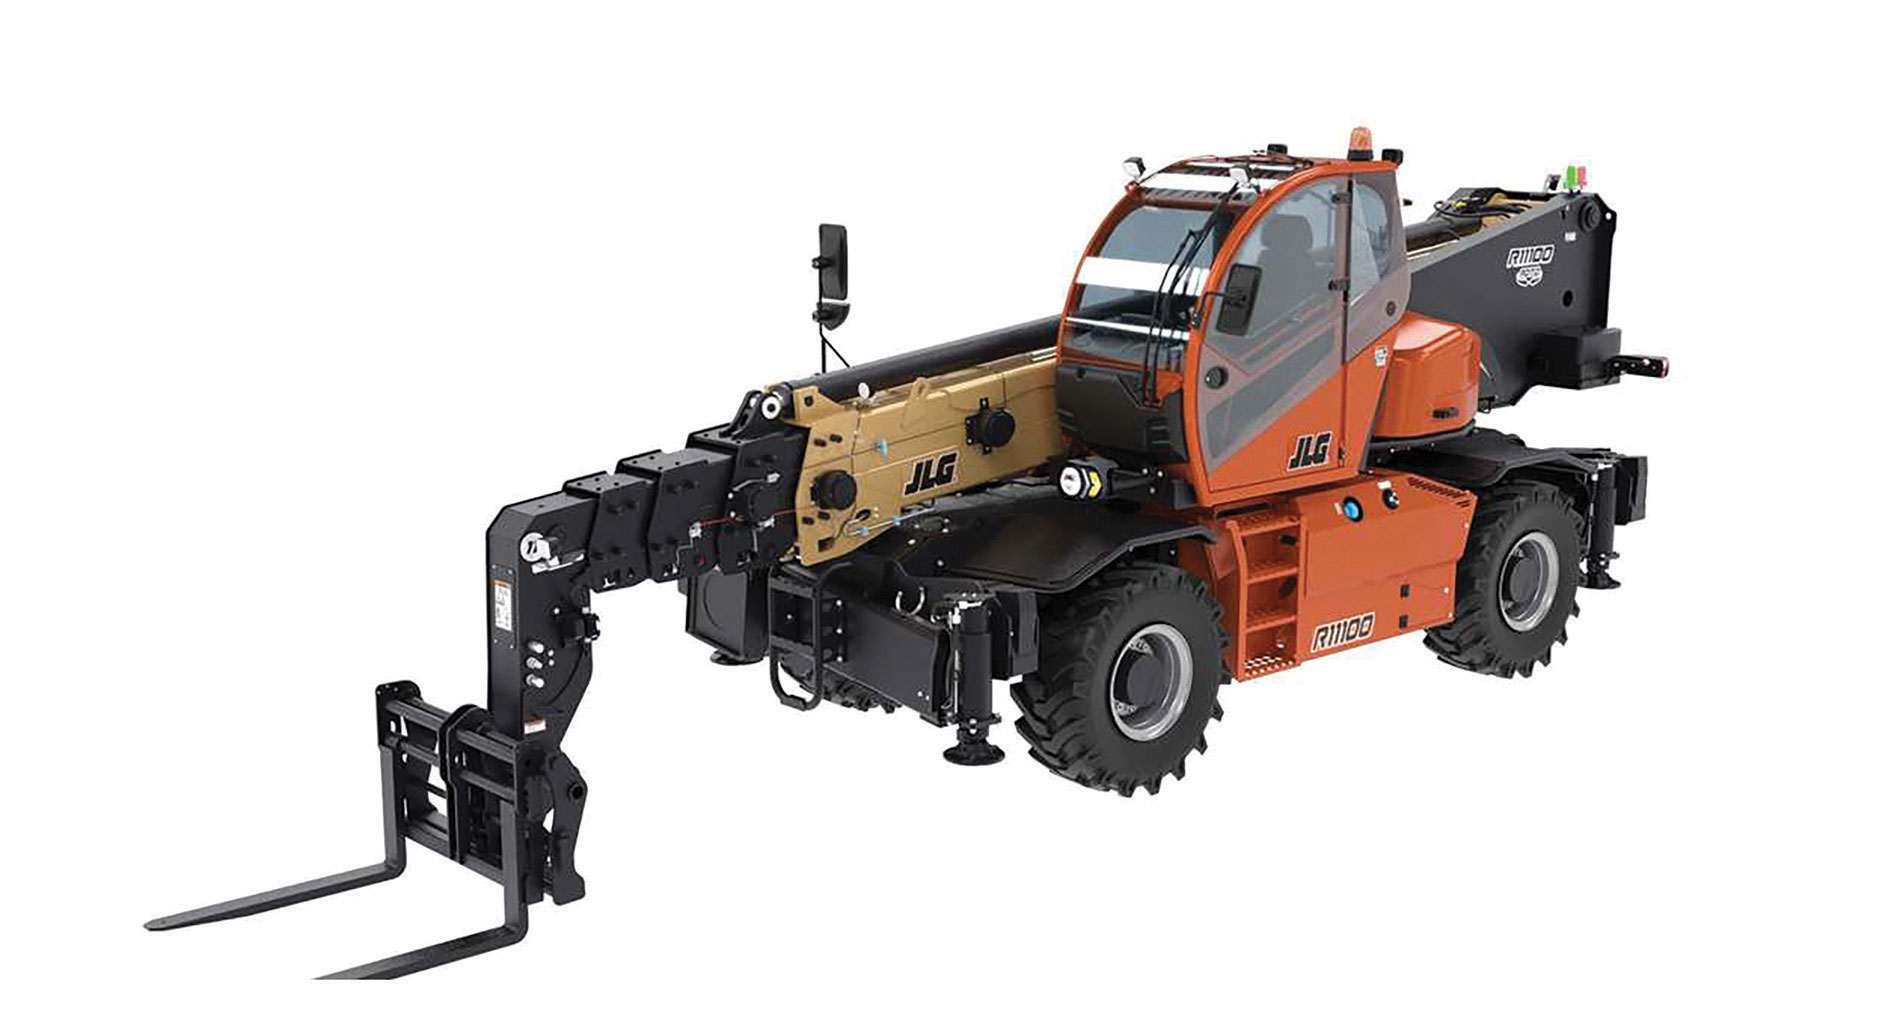 Orange and tan rotating telehandler and crane. Image by JLG Industries.